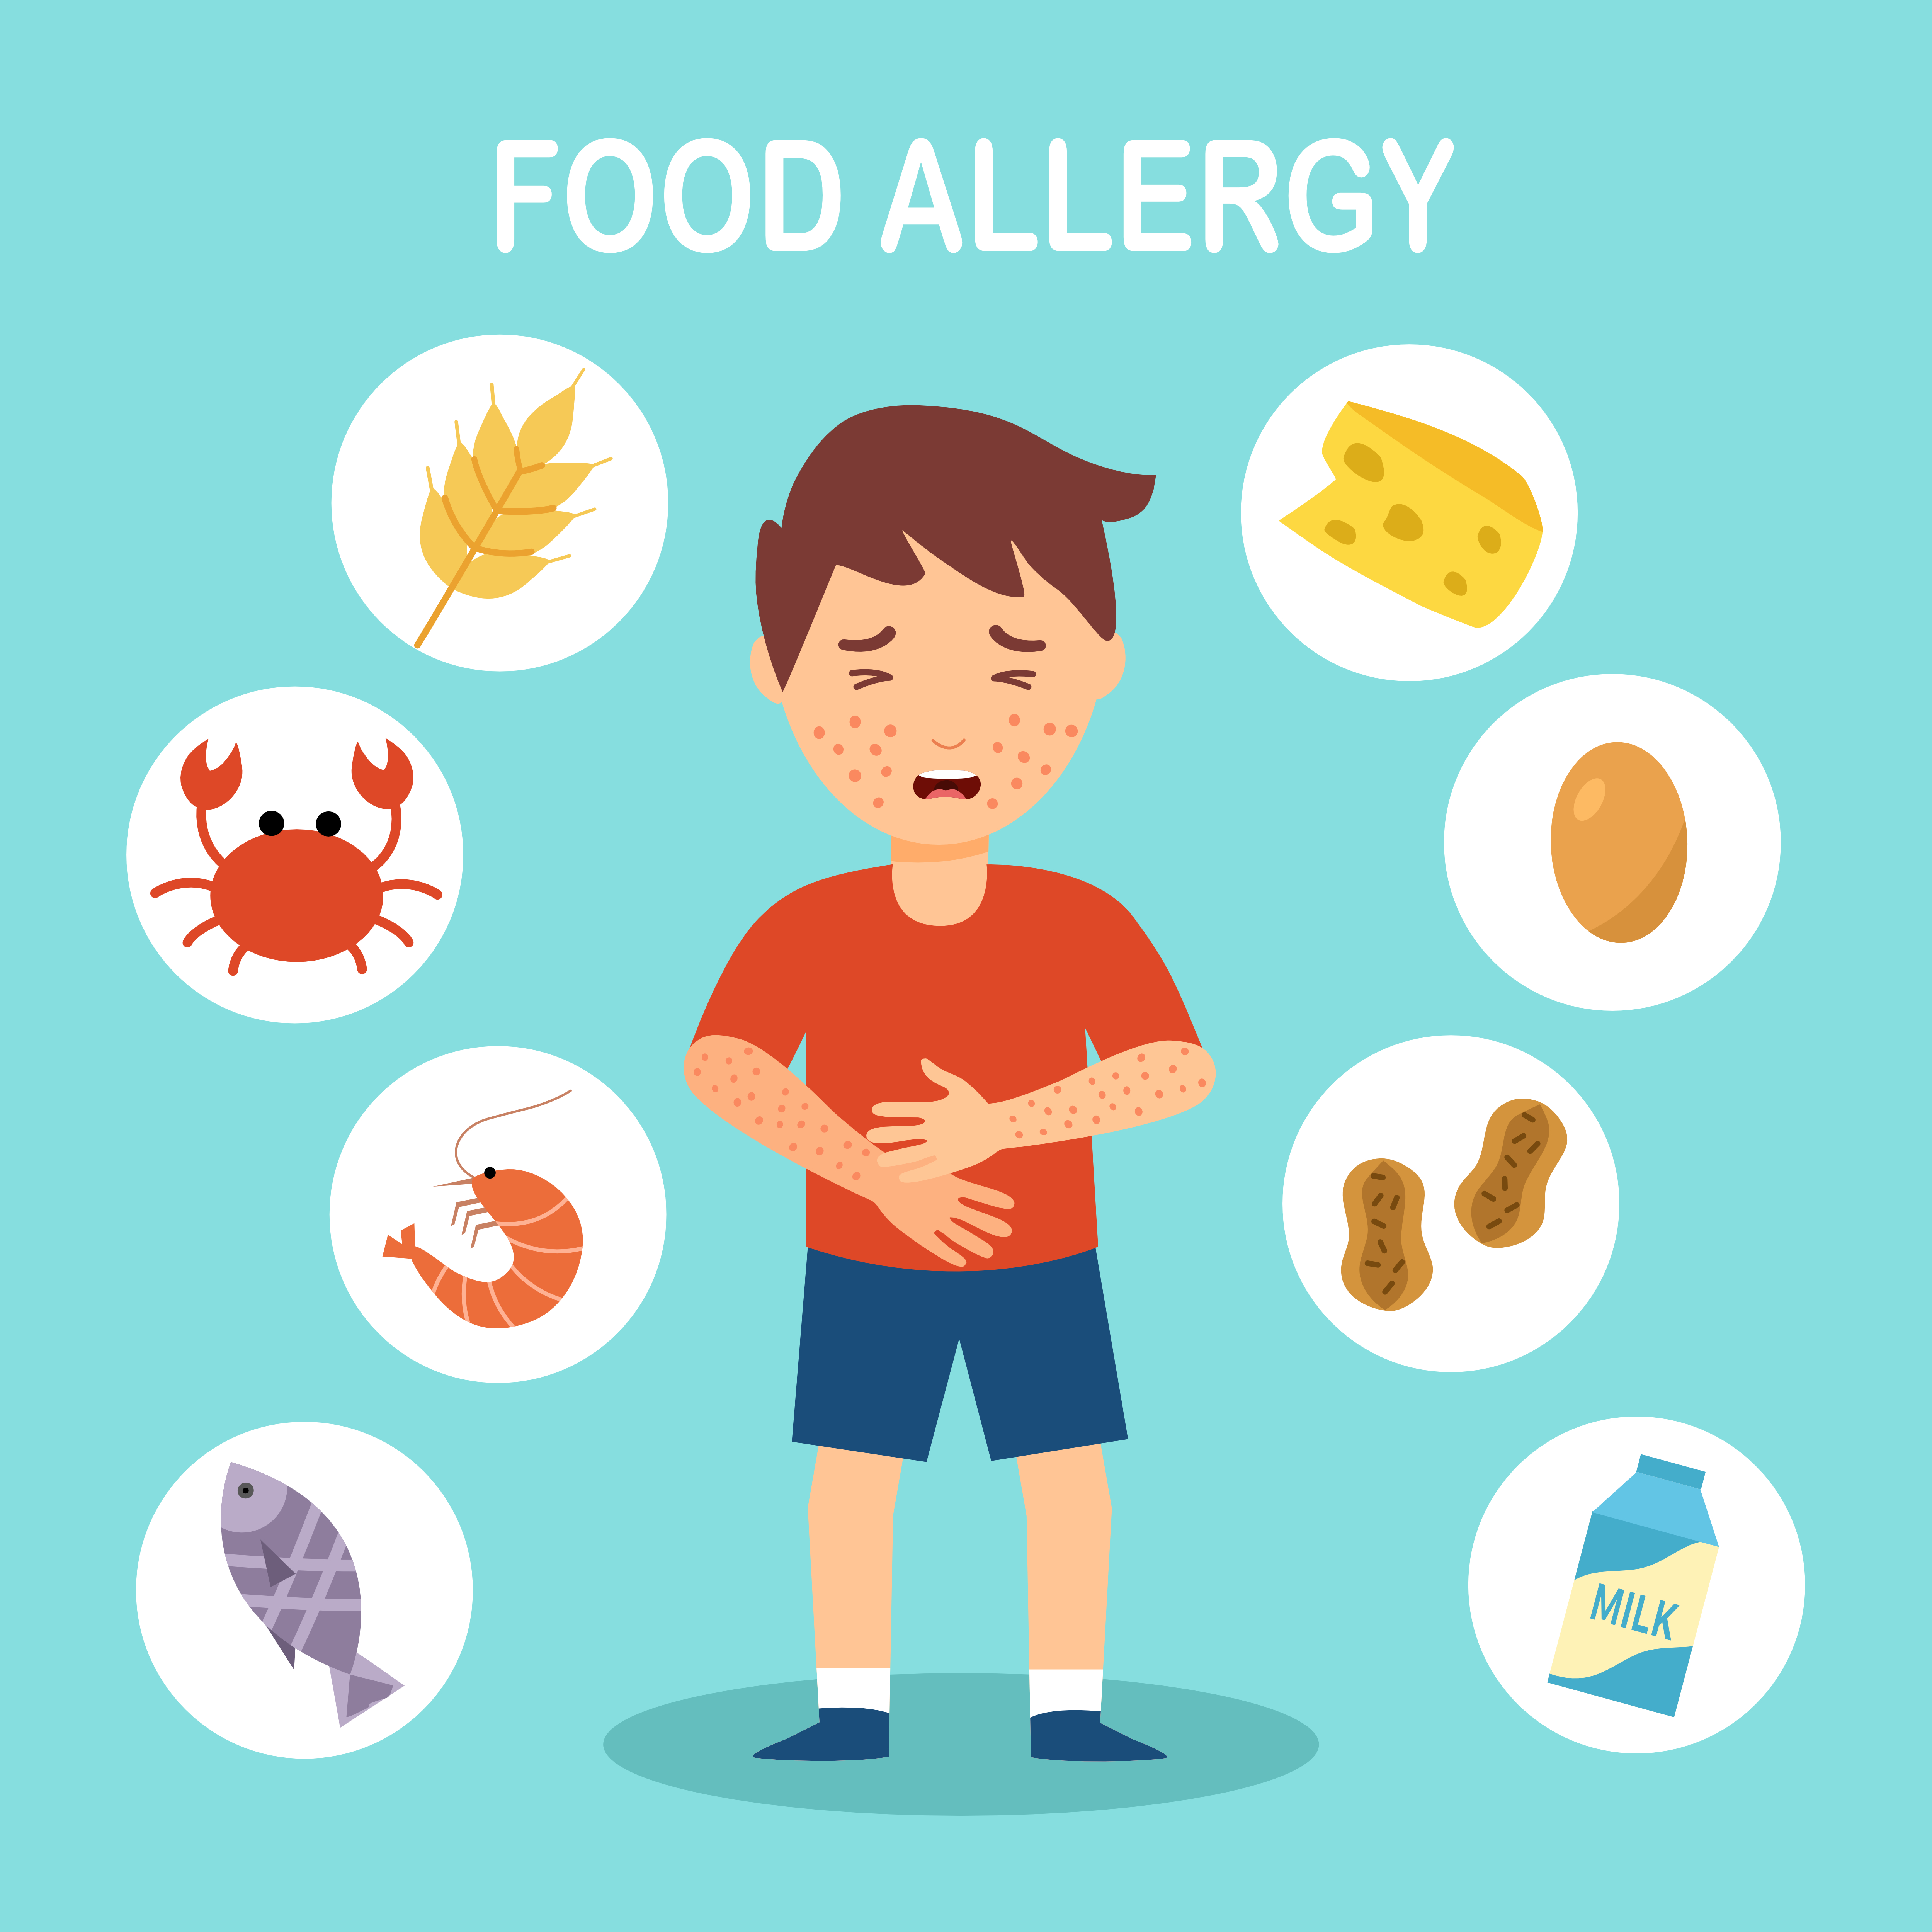 Coping with food allergies